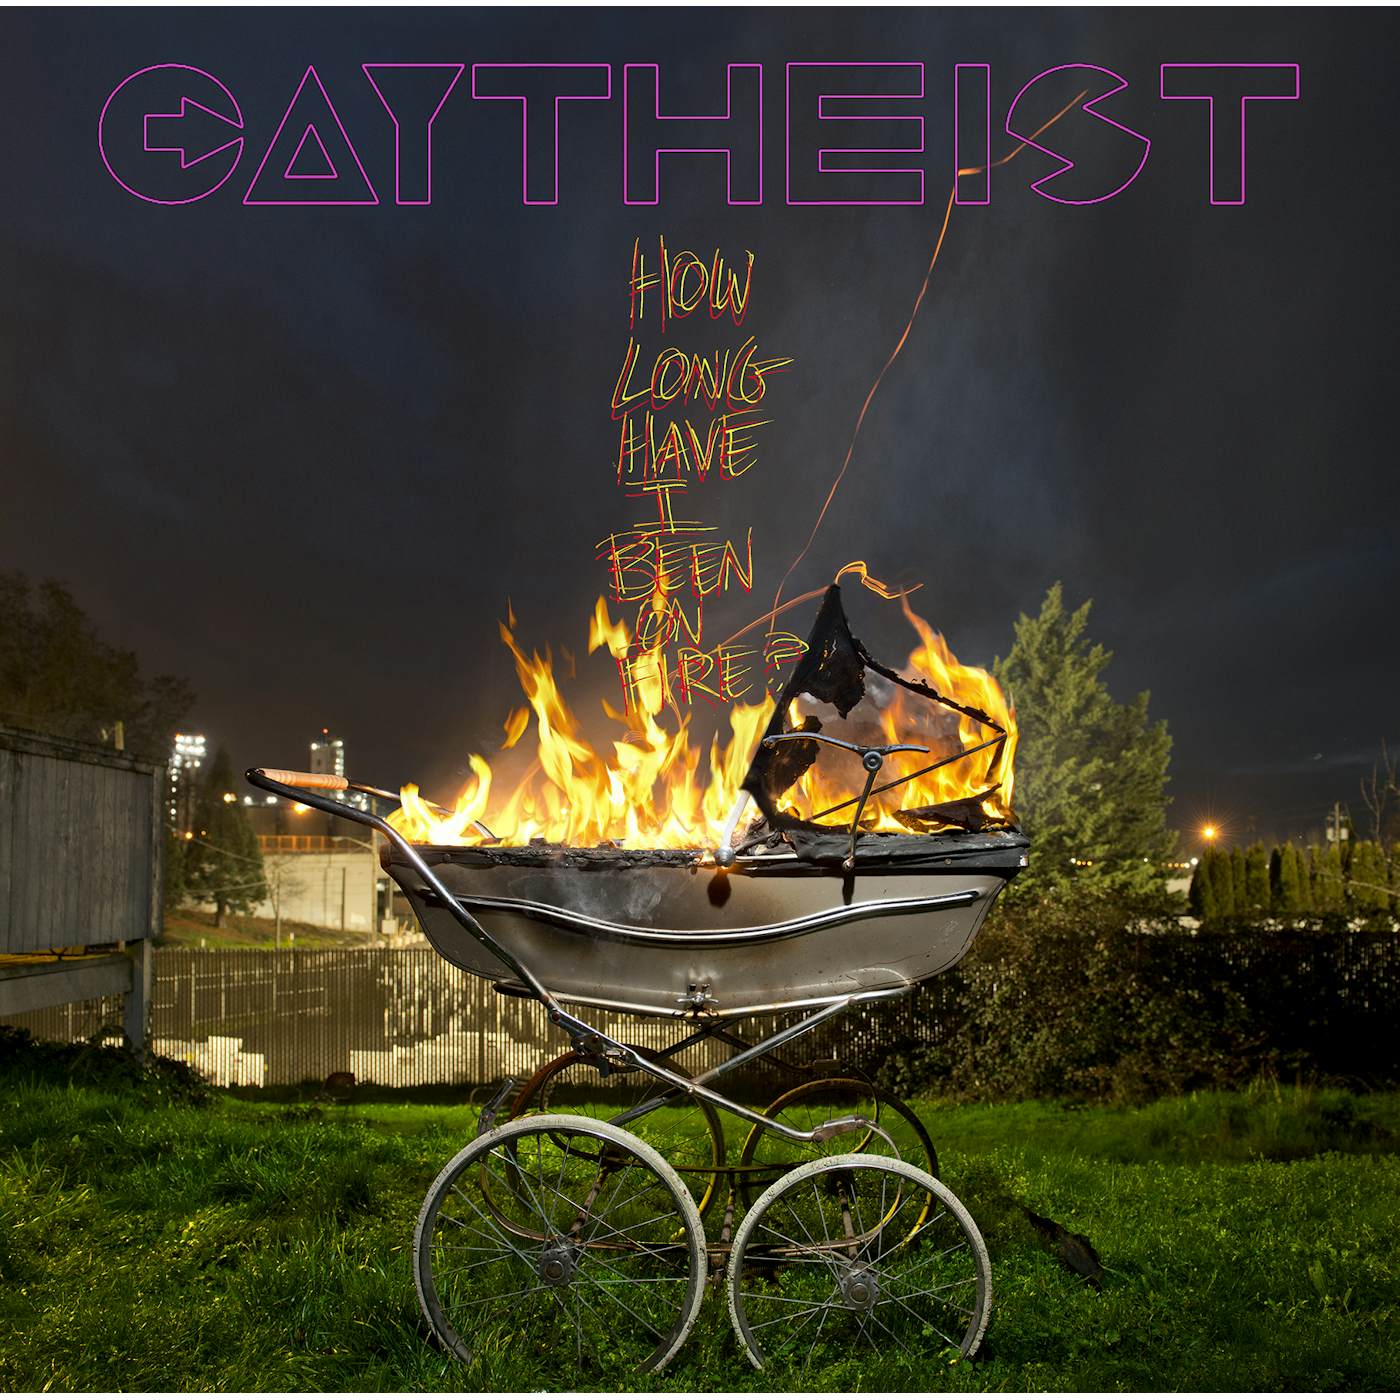 Gaytheist How Long Have I Been On Fire? Vinyl Record